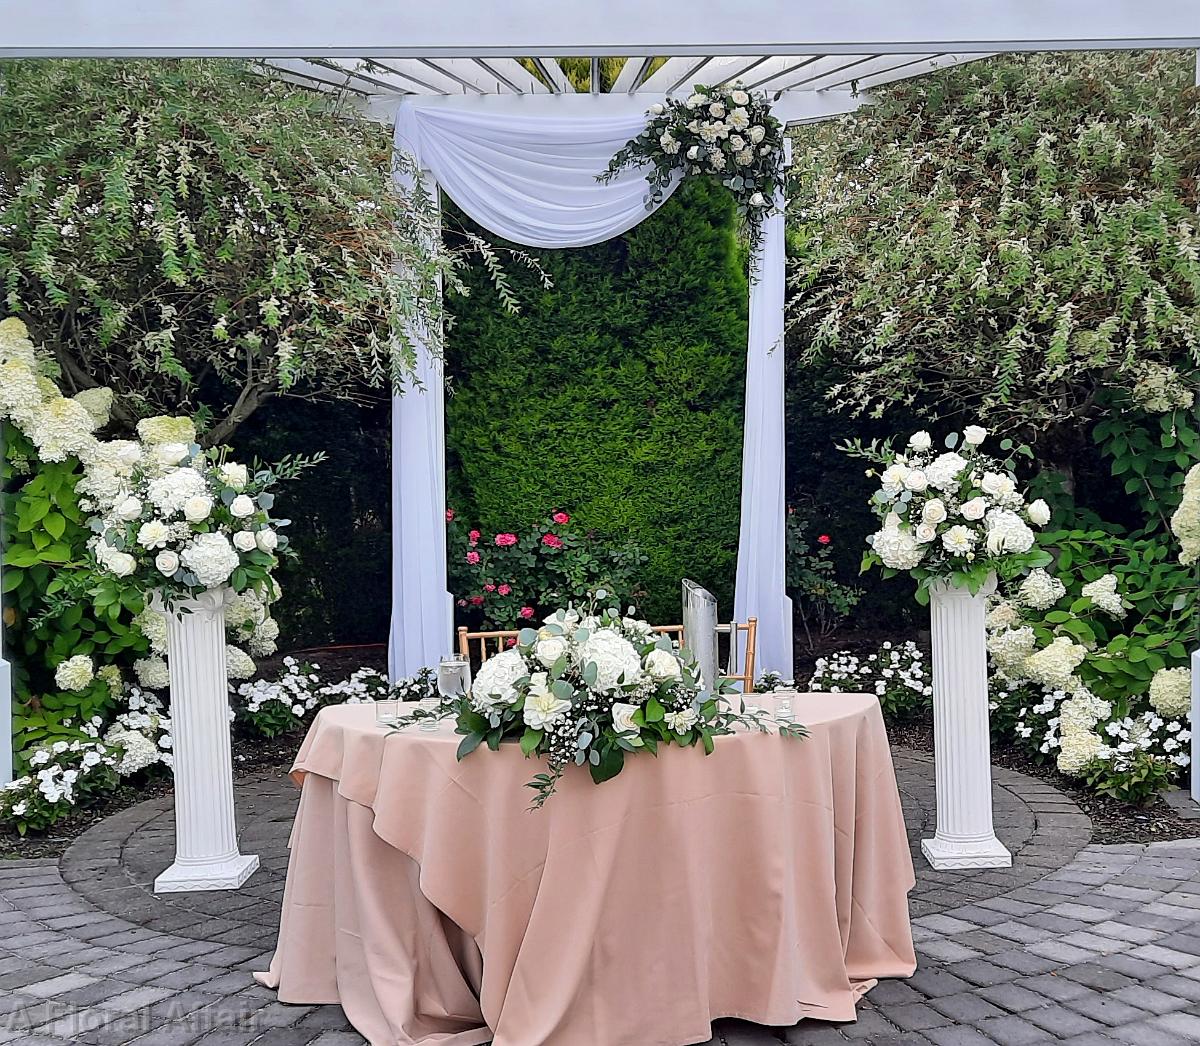 RF1547- Sweethear Table, Ceremony Arrangements, and Arbor Flowers in All White at The Aerie